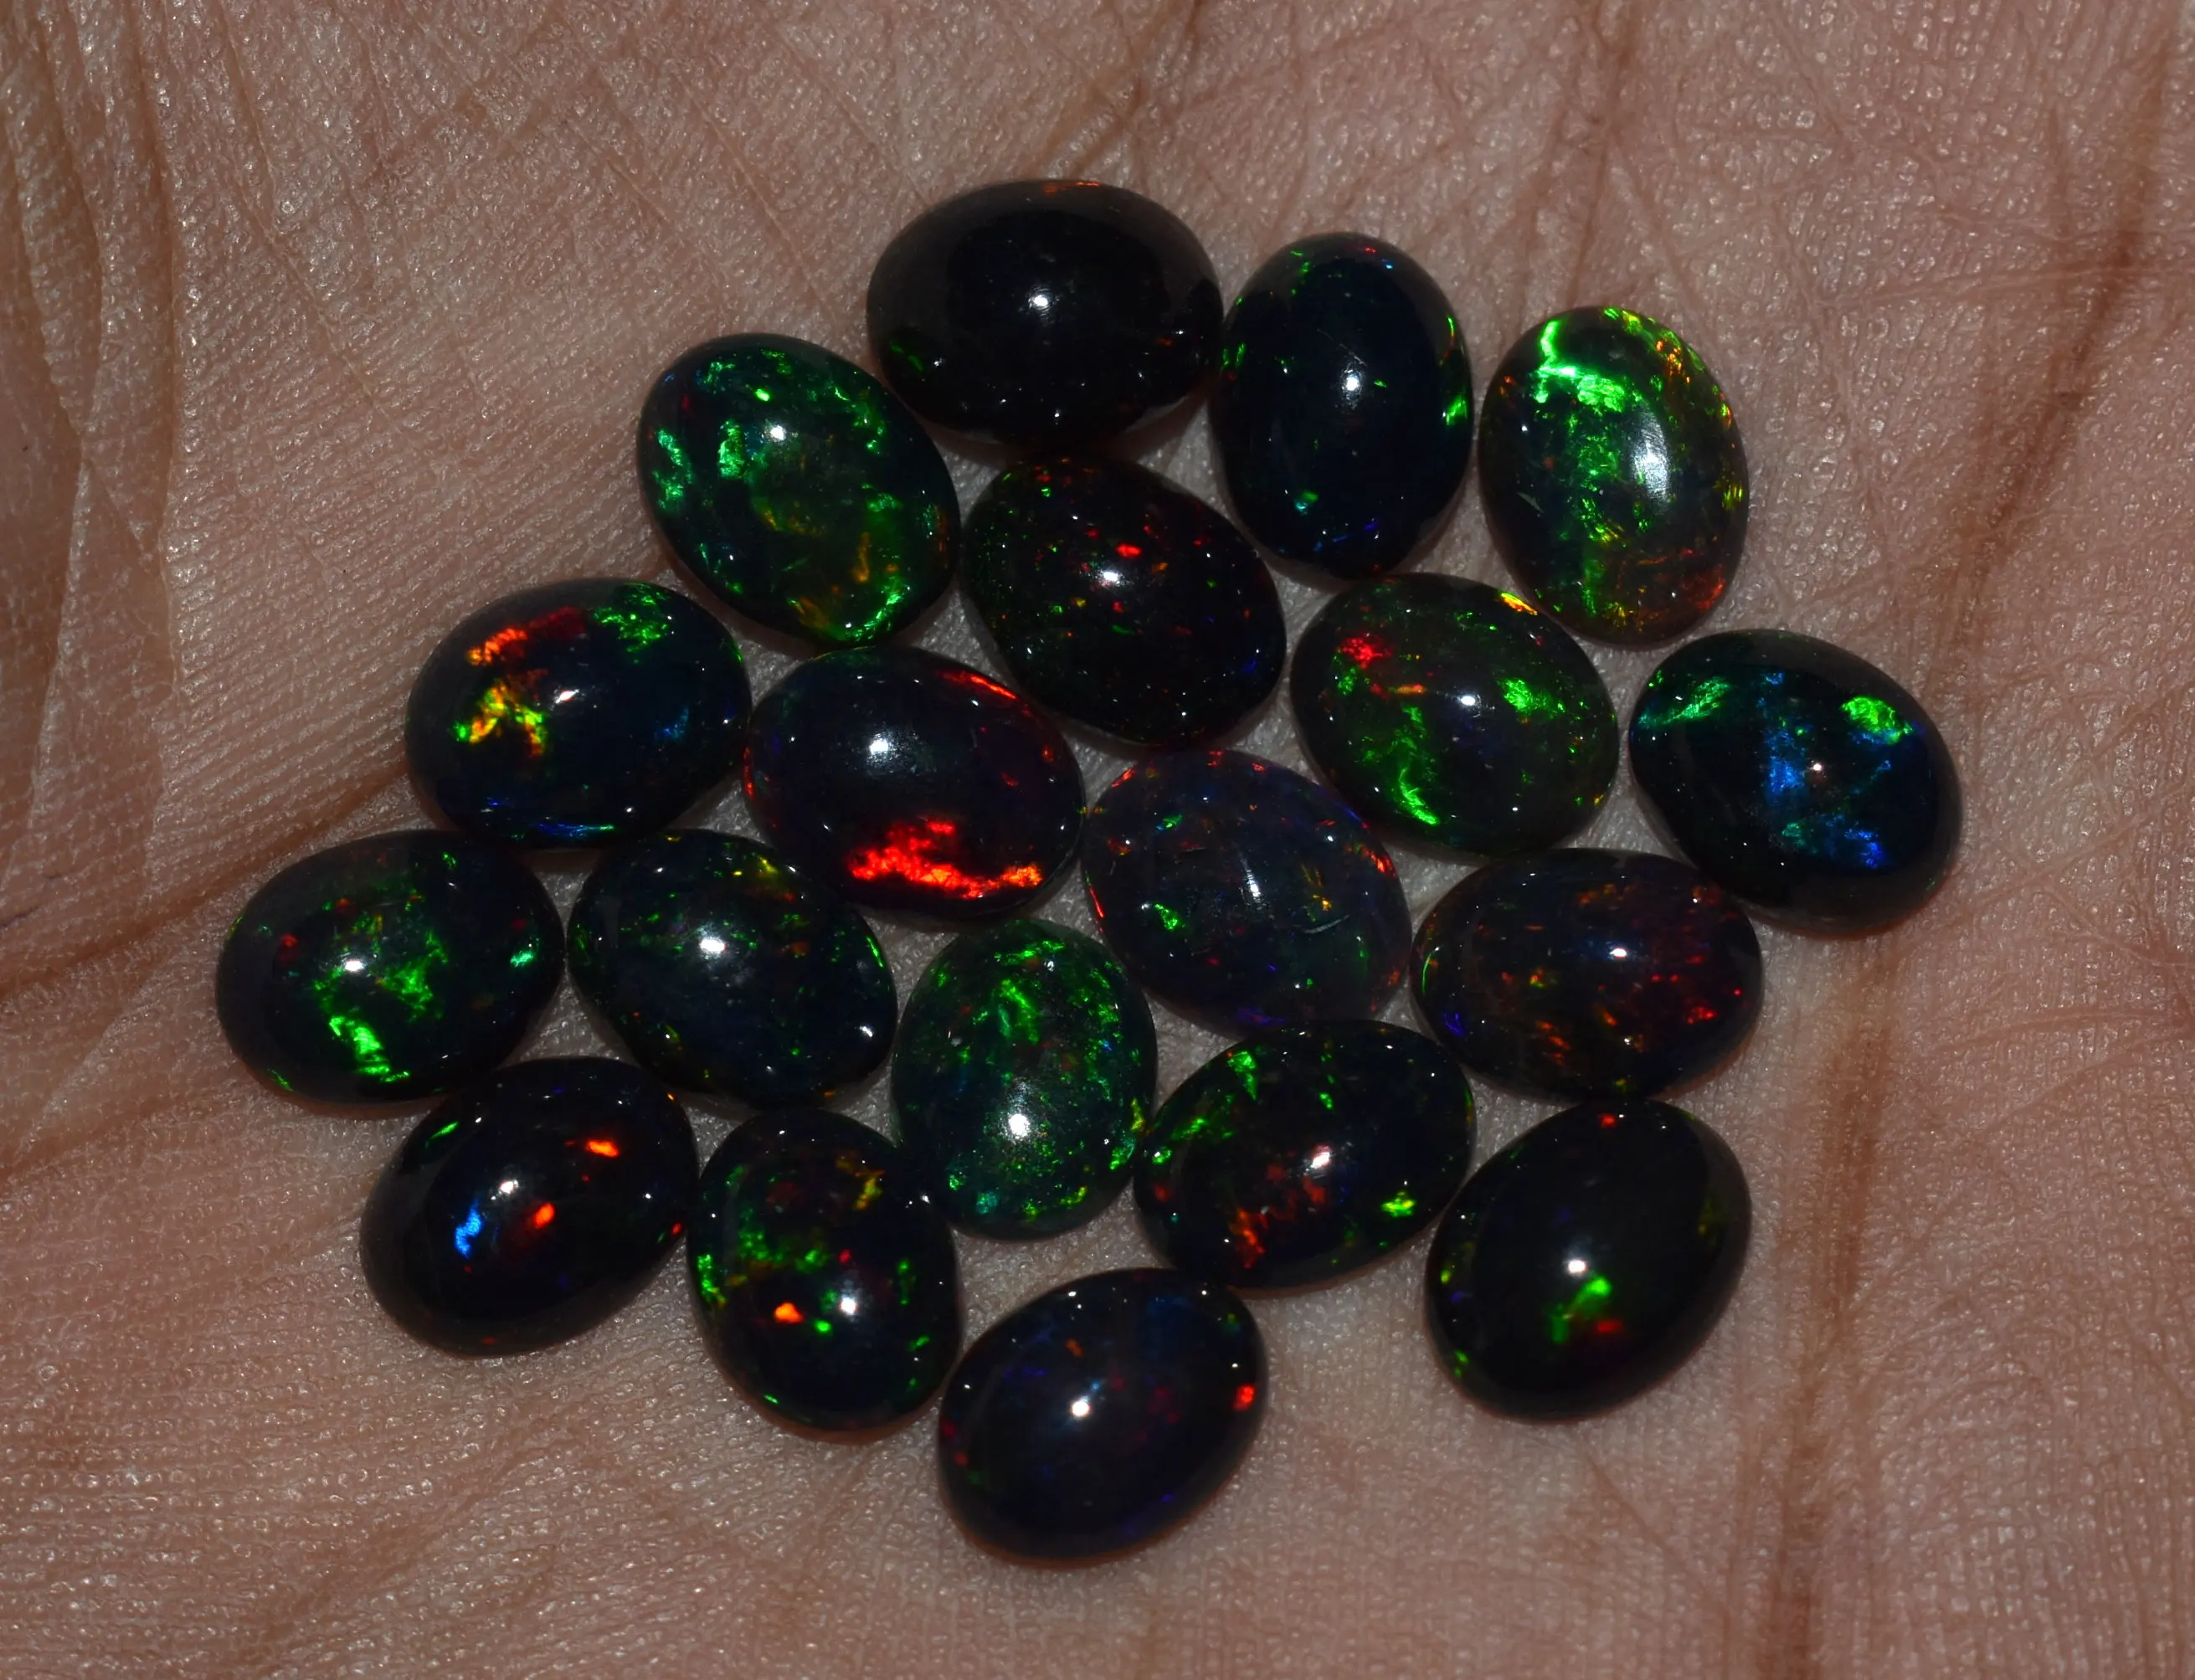 0.85ct 0.17g Gemstones-Ethiopian Black Opal Cabs Oval 7x5mm Approximatly